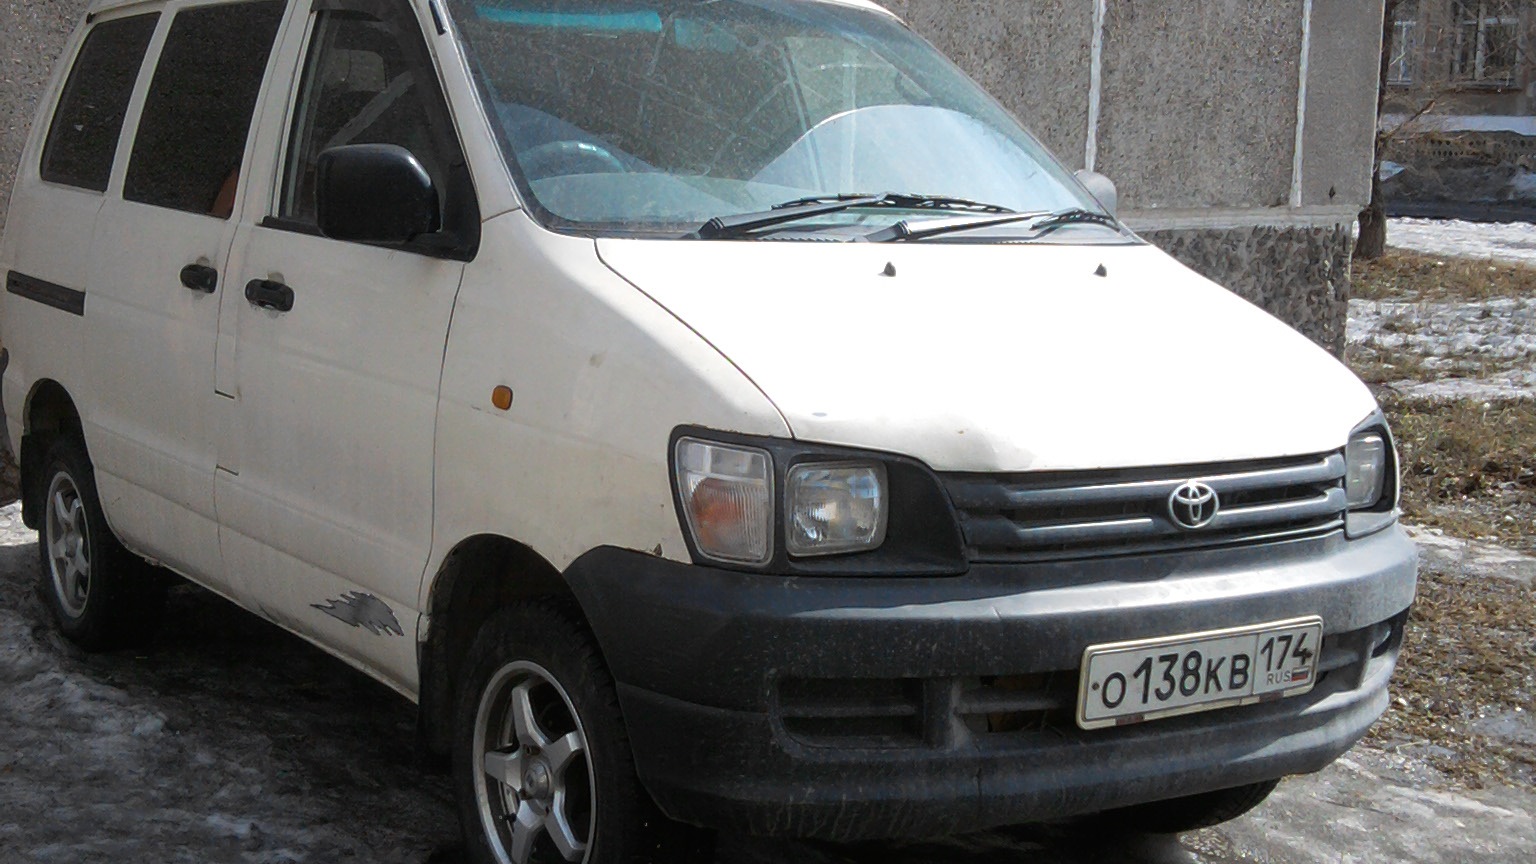 Toyota Town Ace 1998. Town Ace 1998. Таун айс 1998